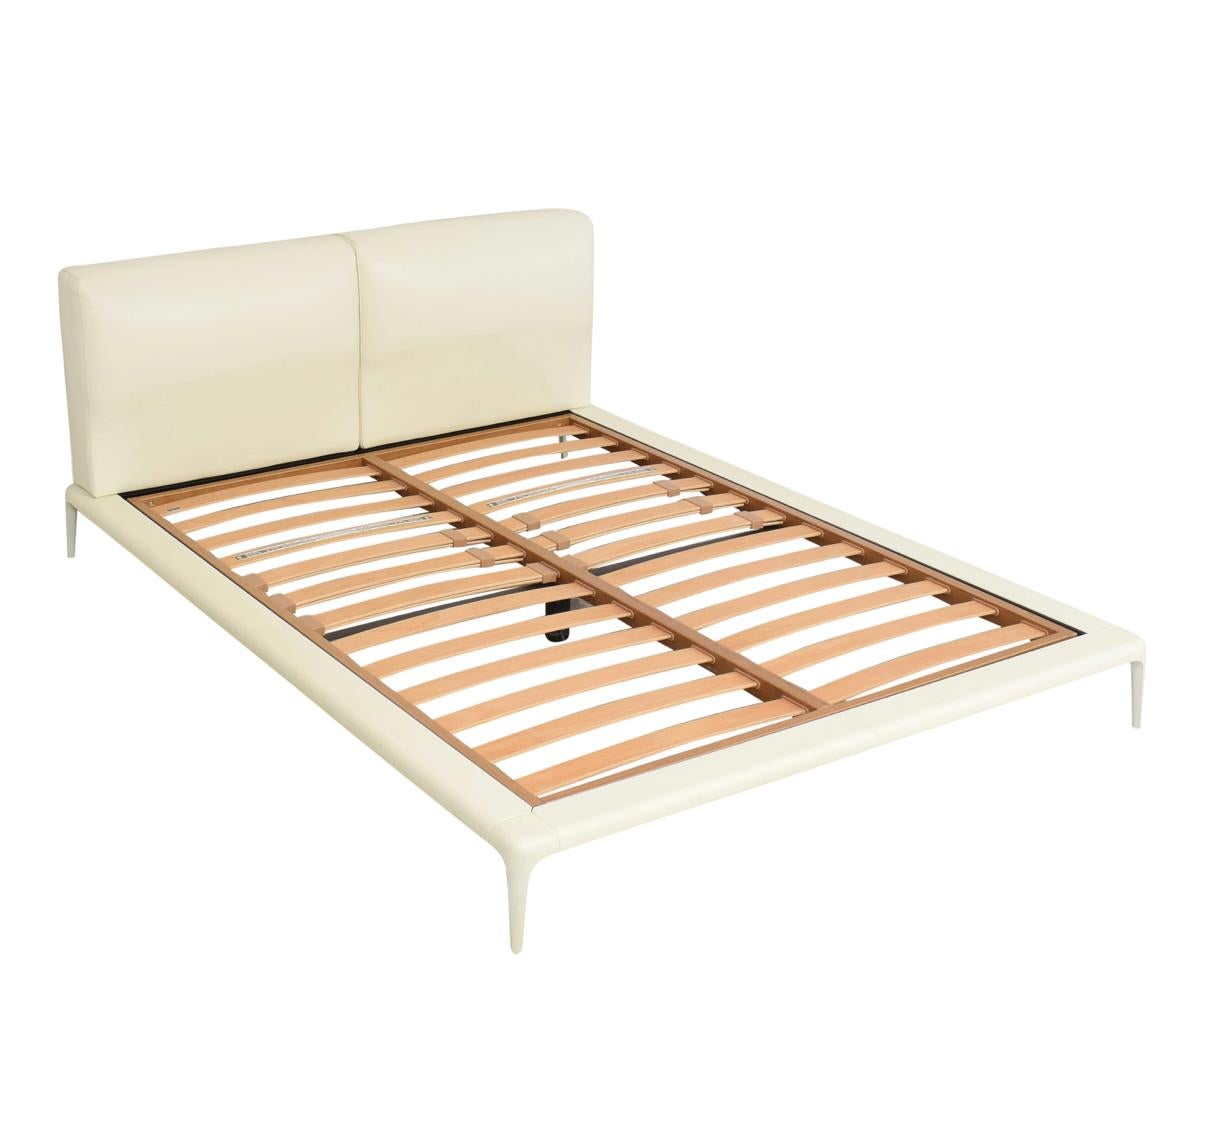 Cream leather Poliform park original queen platform bed. Made in Italy. White / ivory leather. Measures: 66